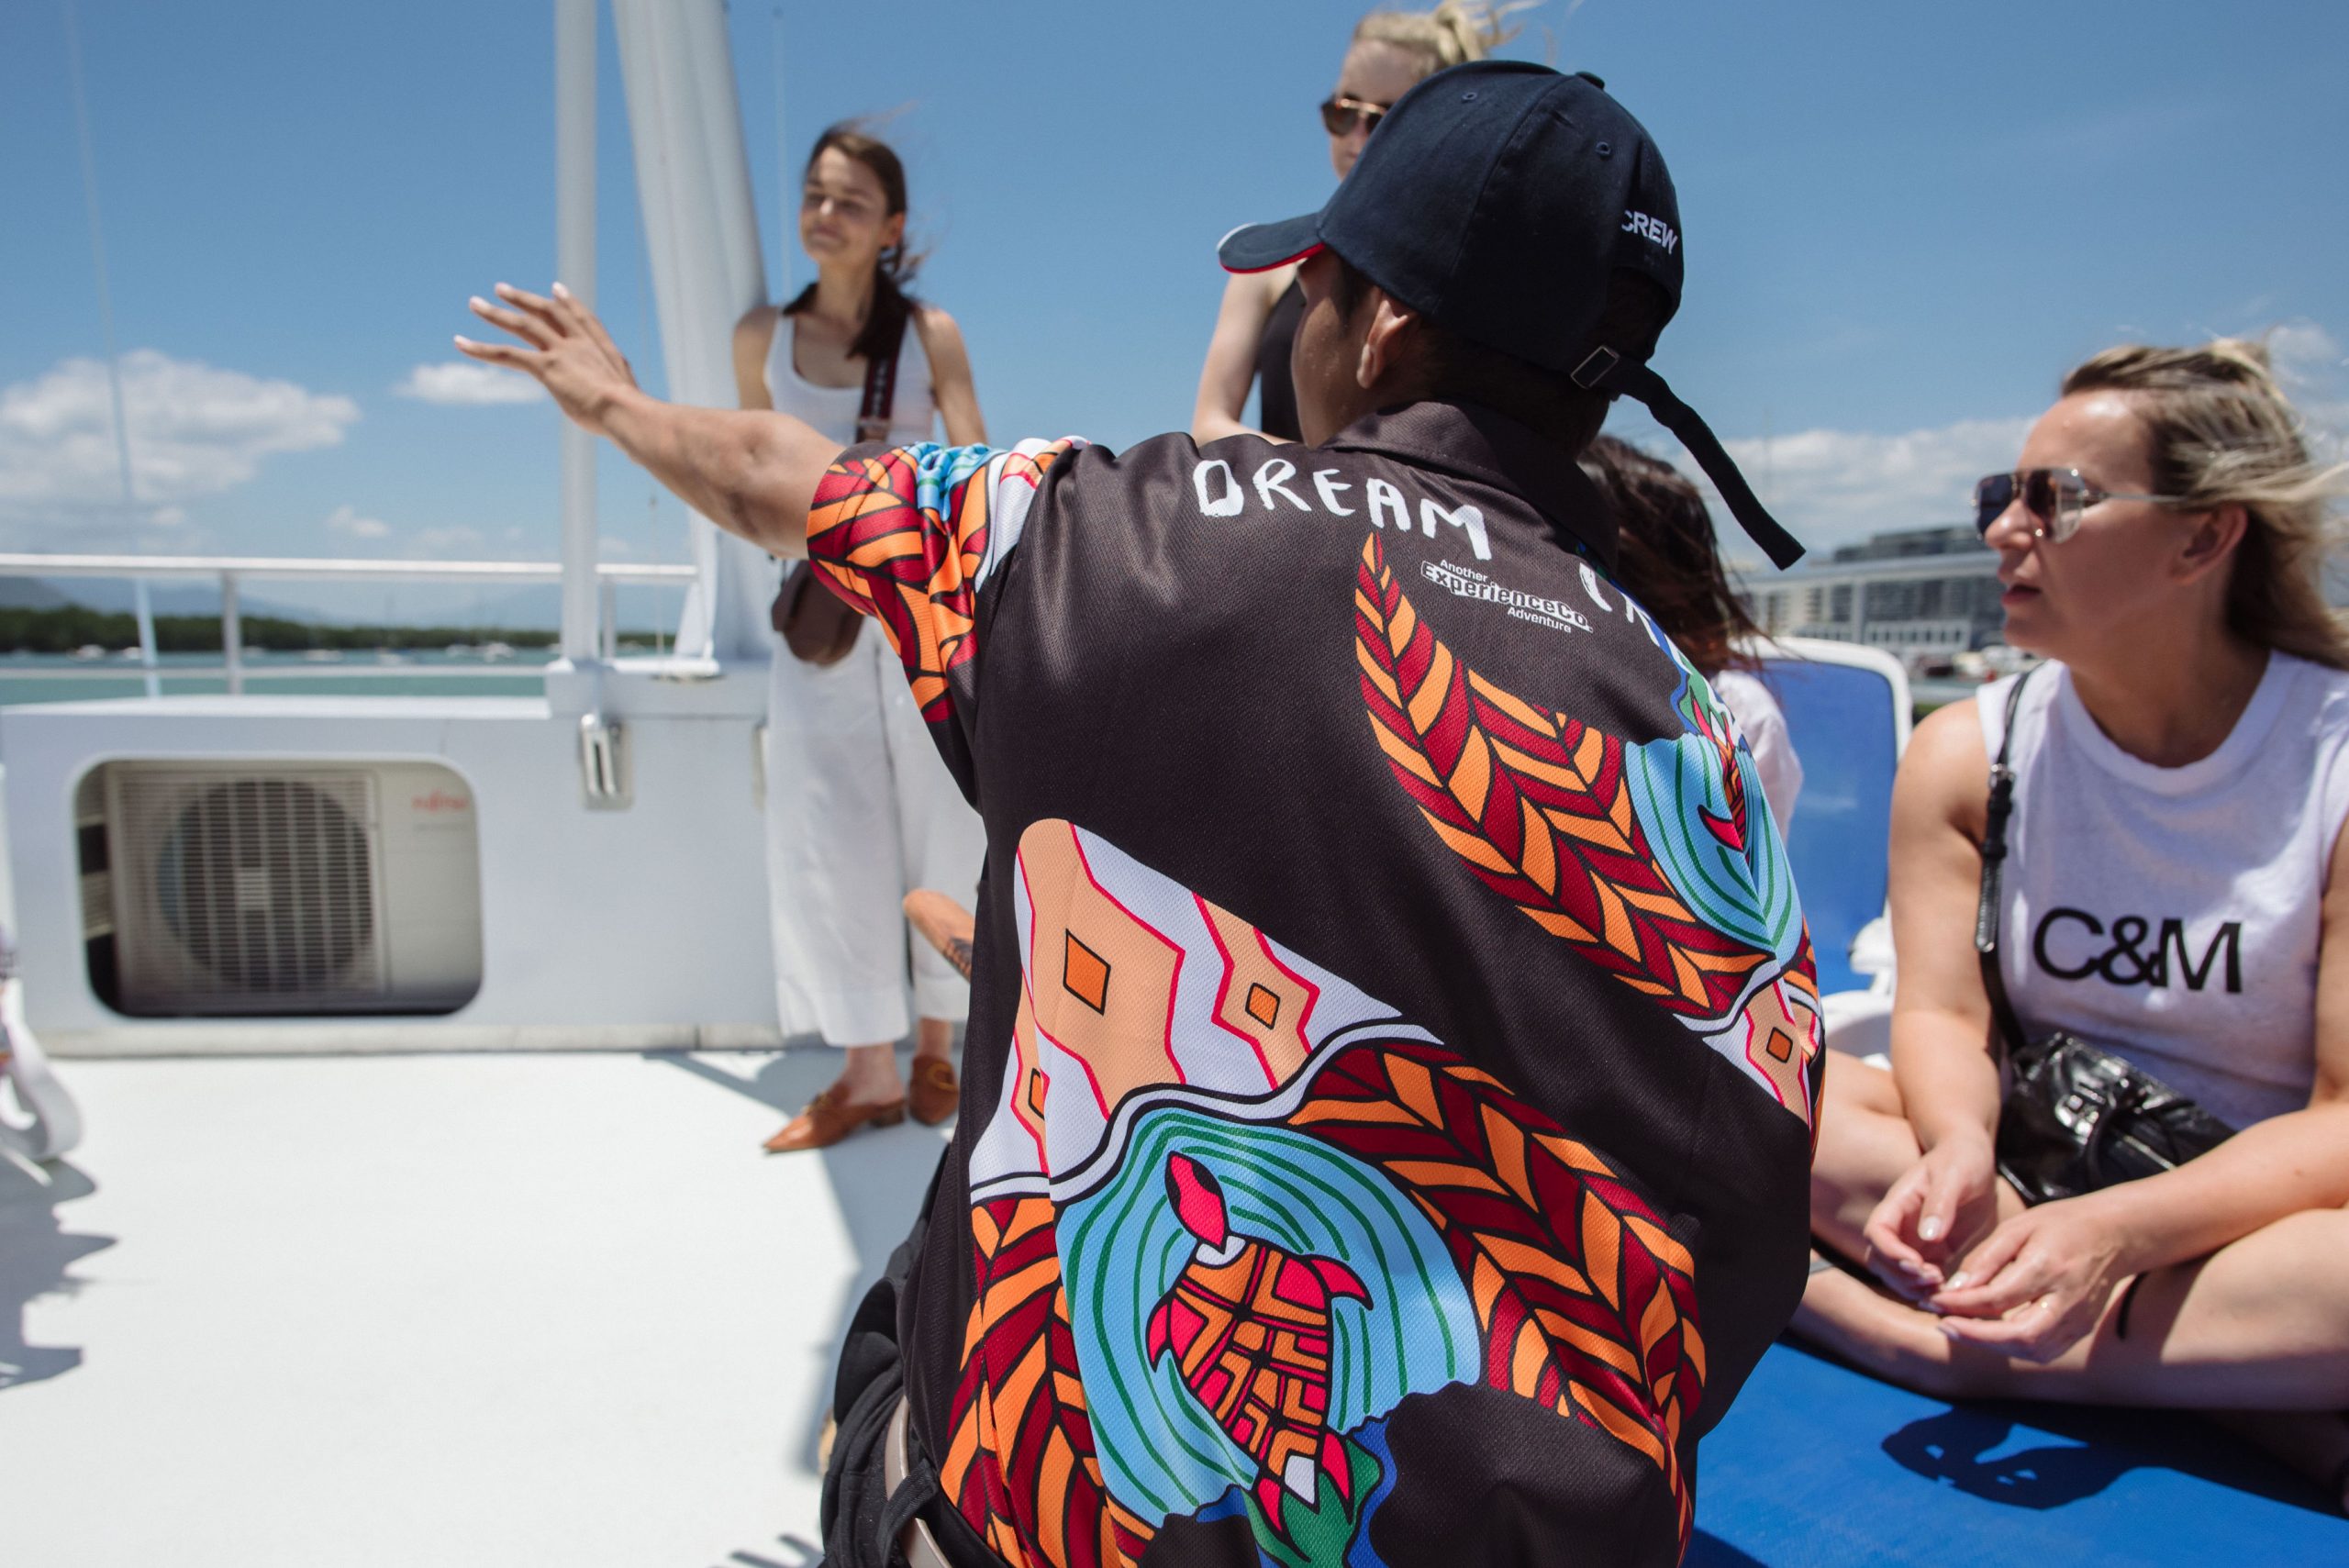 Dream crew staff educating passengers on Dreamtime Dive and Snorkel boat